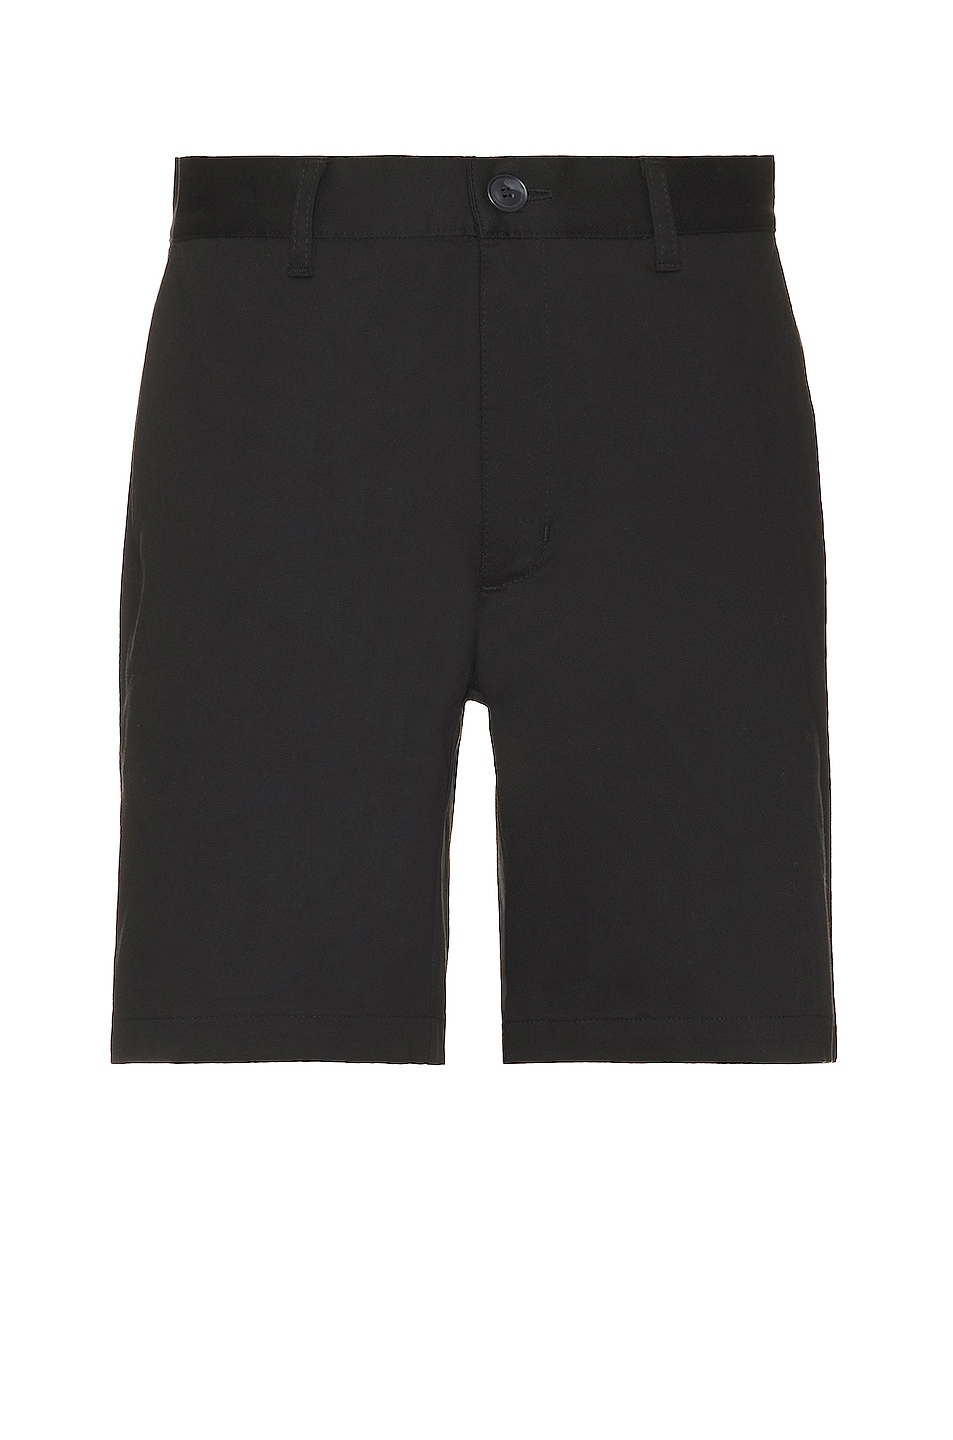 The Chino Short in Black